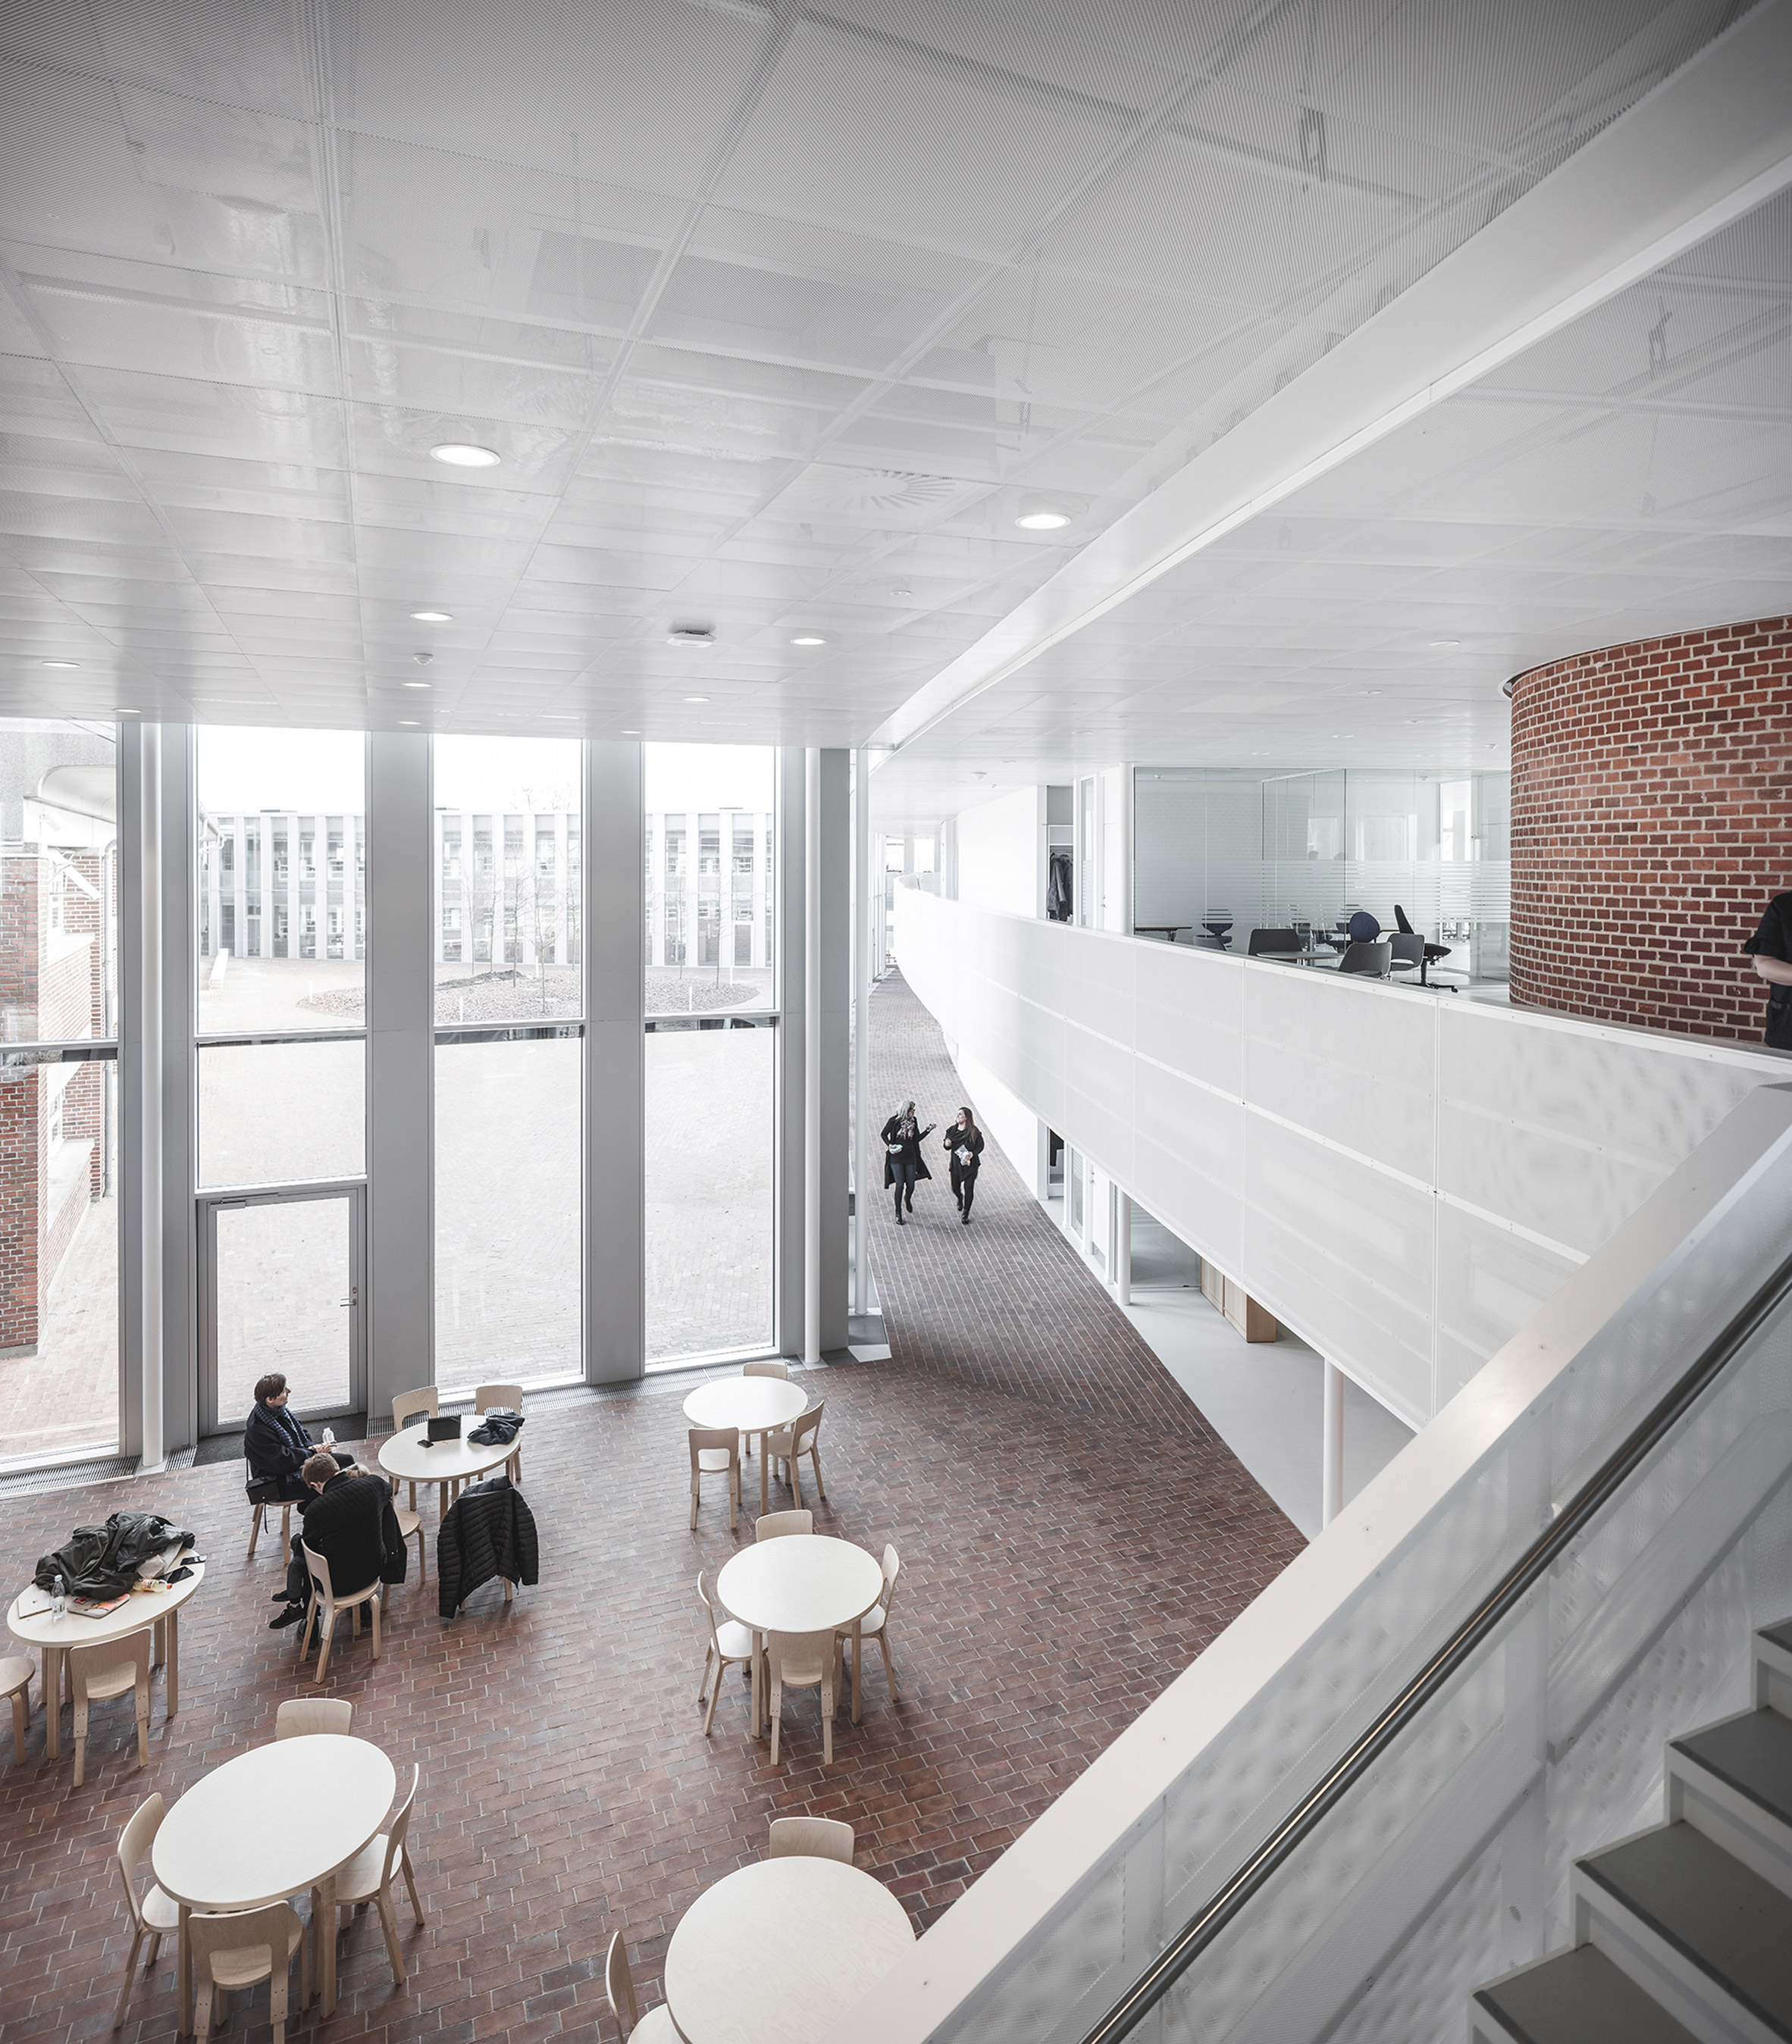 Tonder Townhall extension and renovation by Sleth